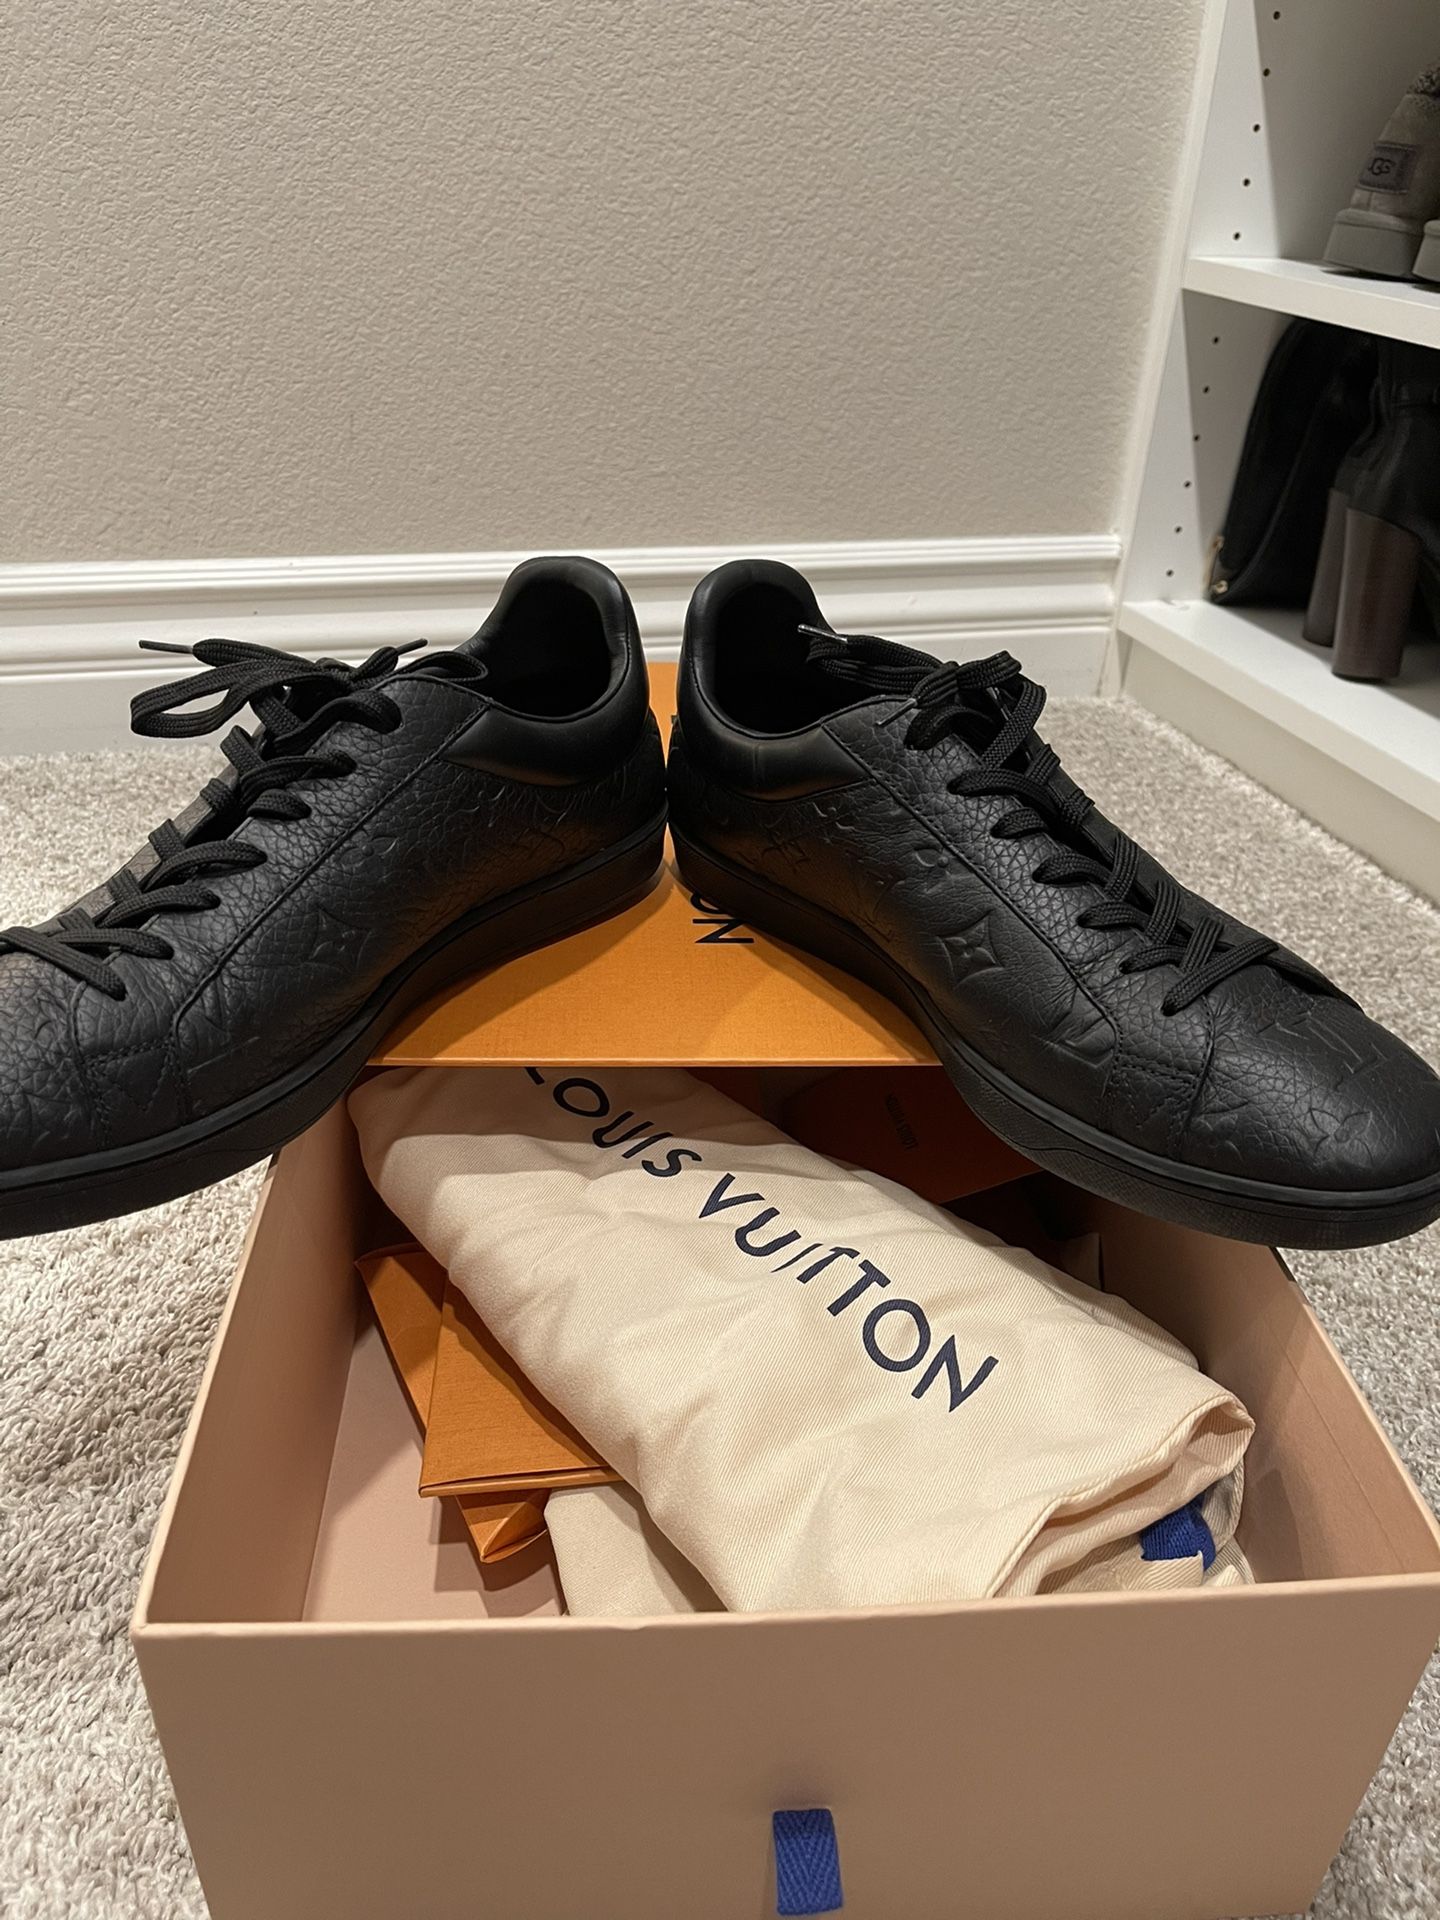 Men’s Navy Louis Vuitton LV Leather Loafers Shoes Blue Checkered! Size 7.5!  Brand New Highest Quality!! for Sale in Las Vegas, NV - OfferUp